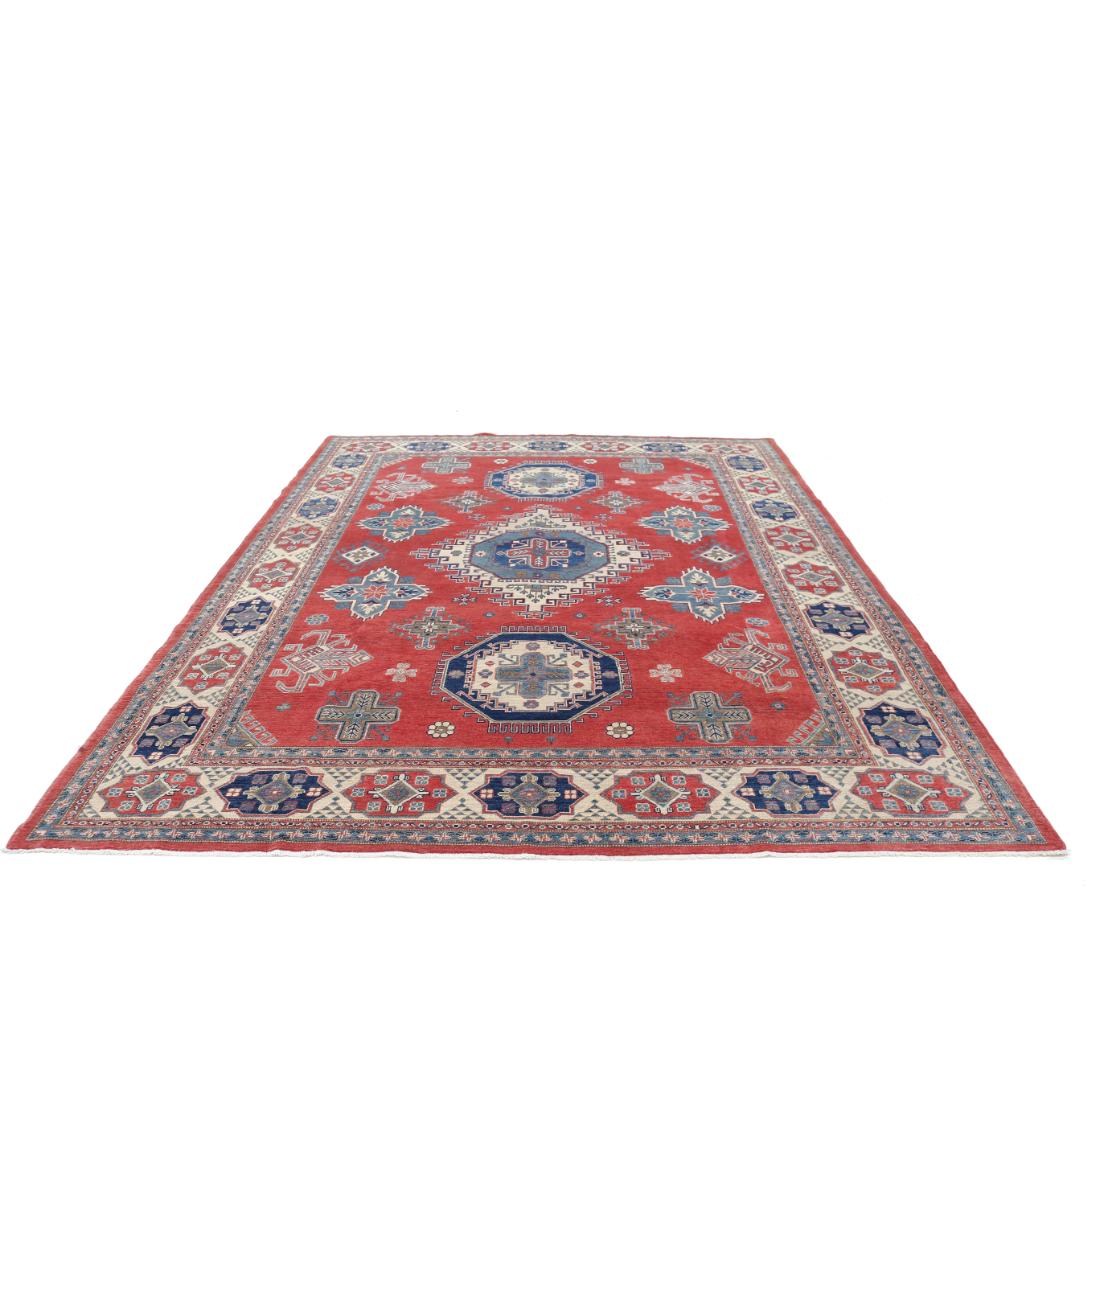 Hand Knotted Tribal Kazak Wool Rug - 8'11'' x 11'2'' 8' 11" X 11' 2" (272 X 340) / Red / Ivory